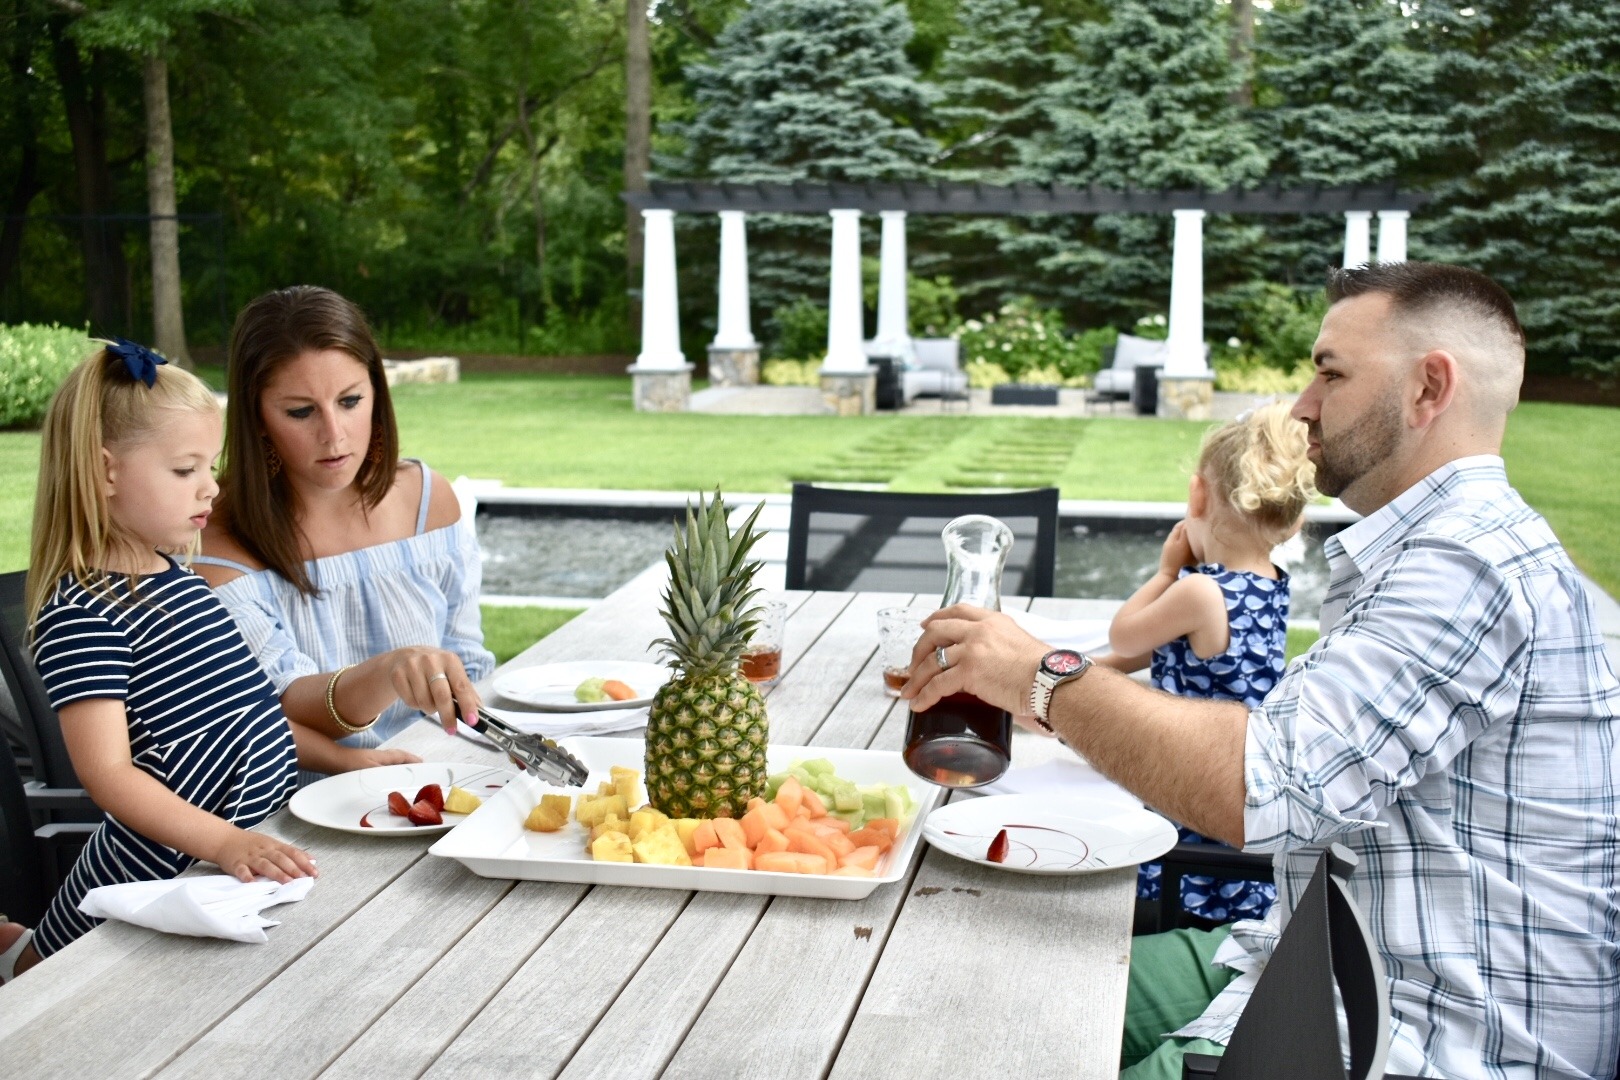 A family of four enjoys an outdoor meal together. A person is pouring a drink, while another adult helps a child with food.